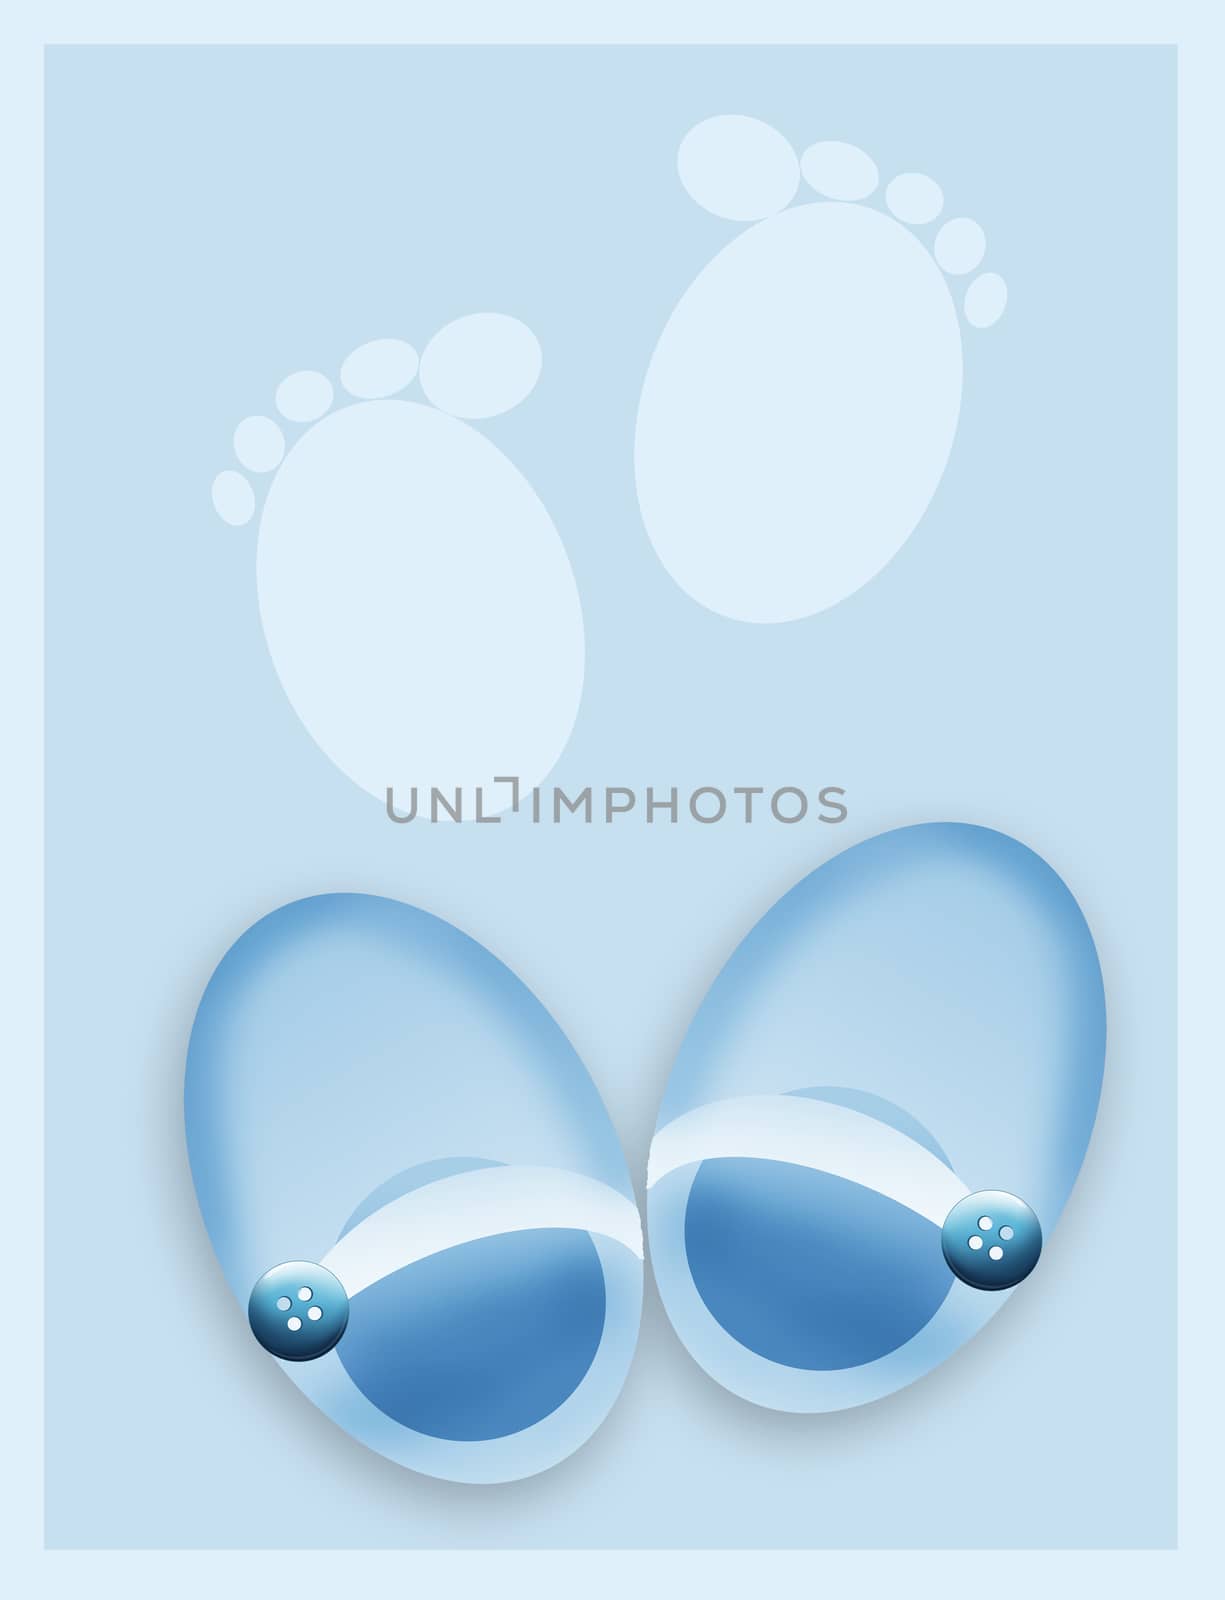 Baby shoes by adrenalina